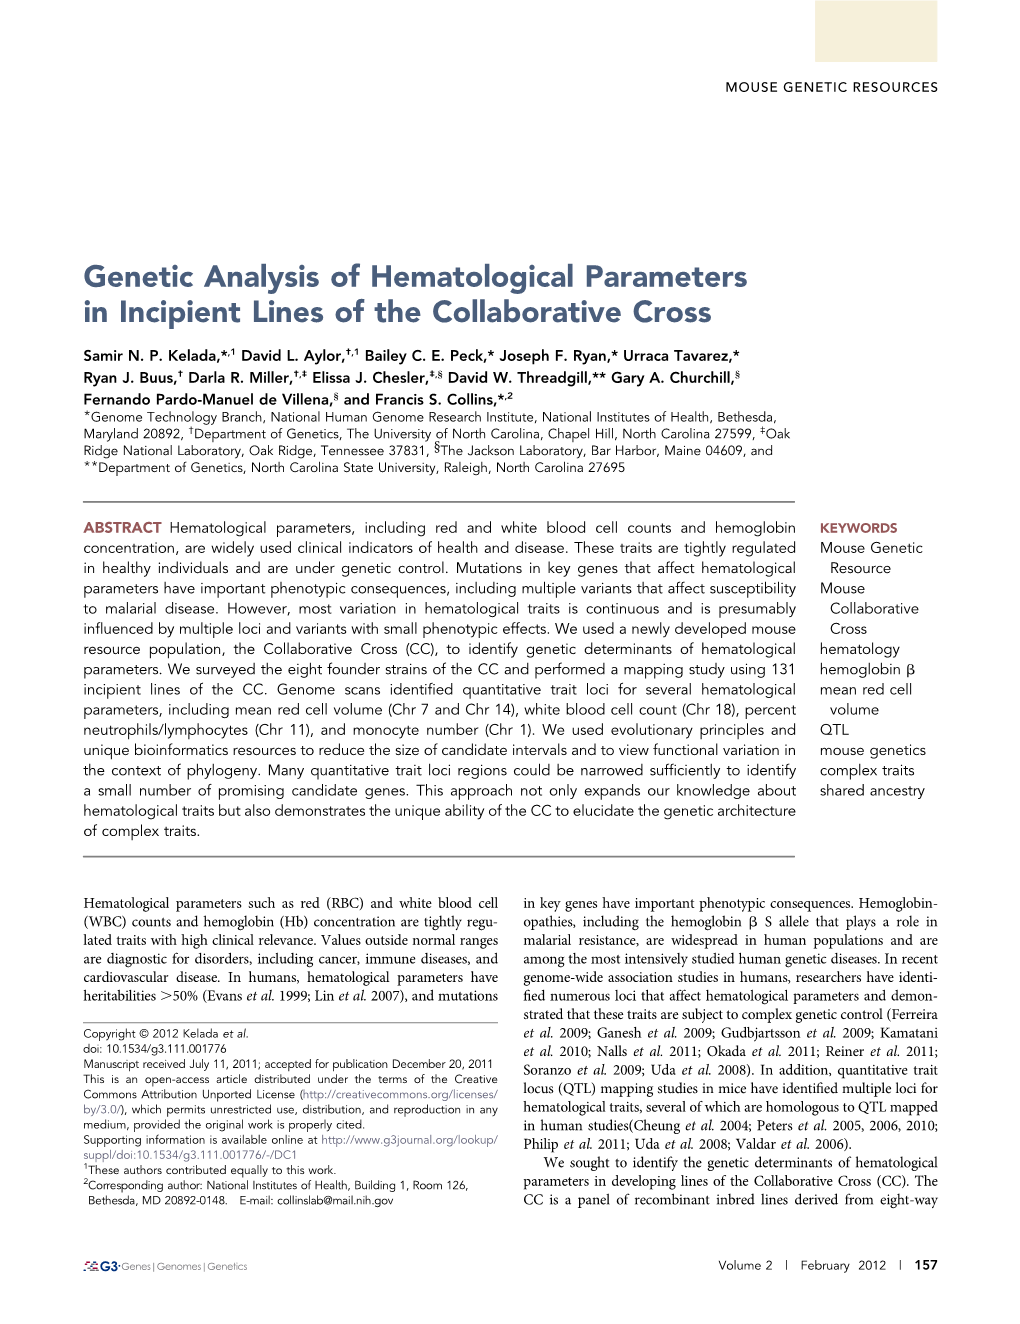 Genetic Analysis of Hematological Parameters in Incipient Lines of the Collaborative Cross